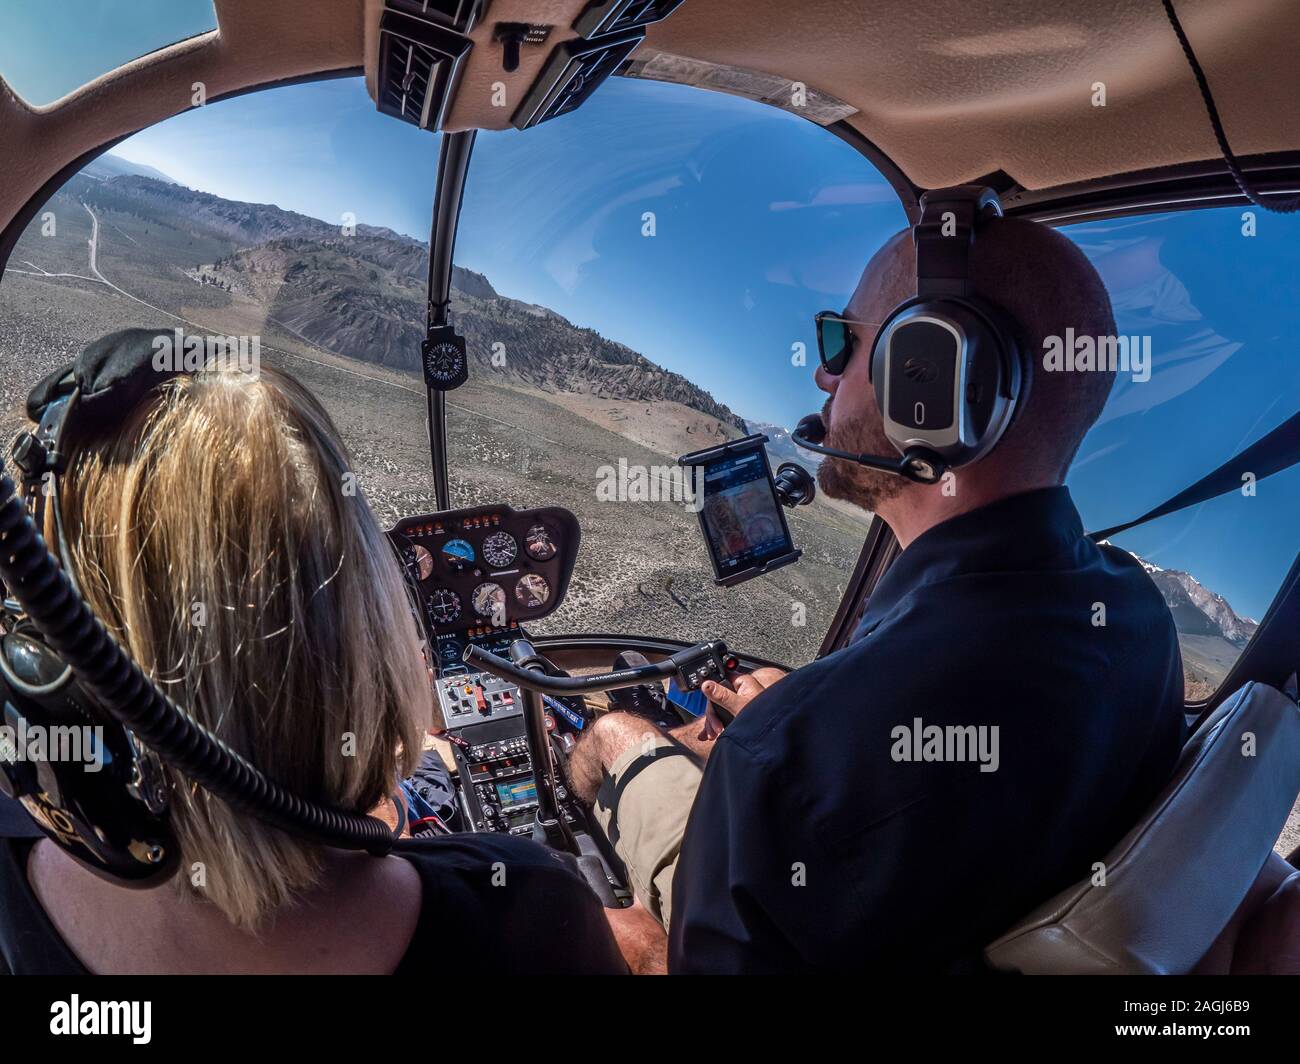 Onboard a Robinson R44 helicopter above the Owens Valley, California. Stock Photo